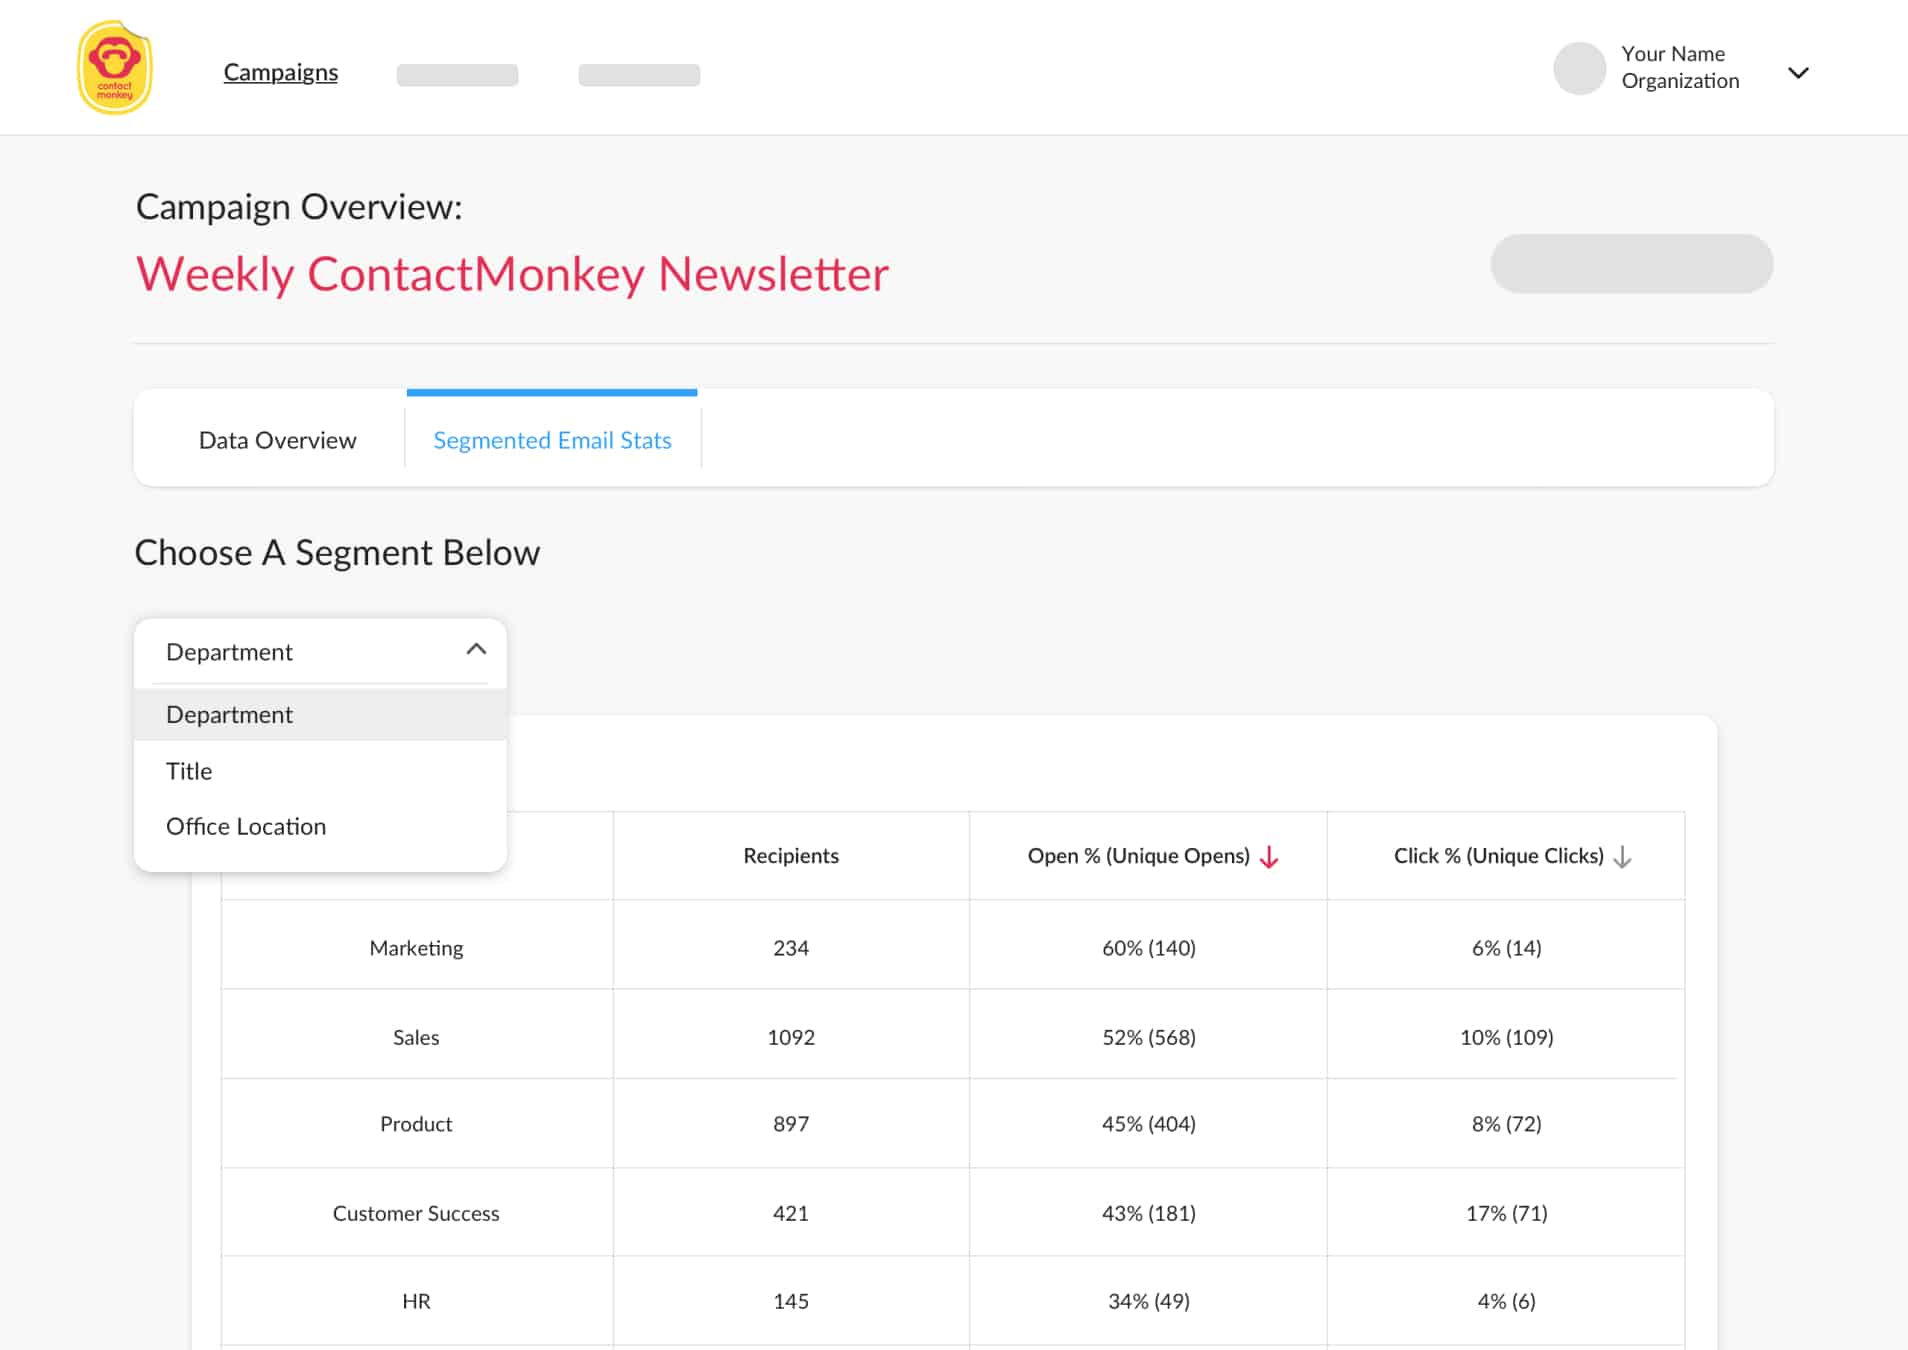 Screenshot of segmented email stats within ContactMonkey's campaign overview dashboard.